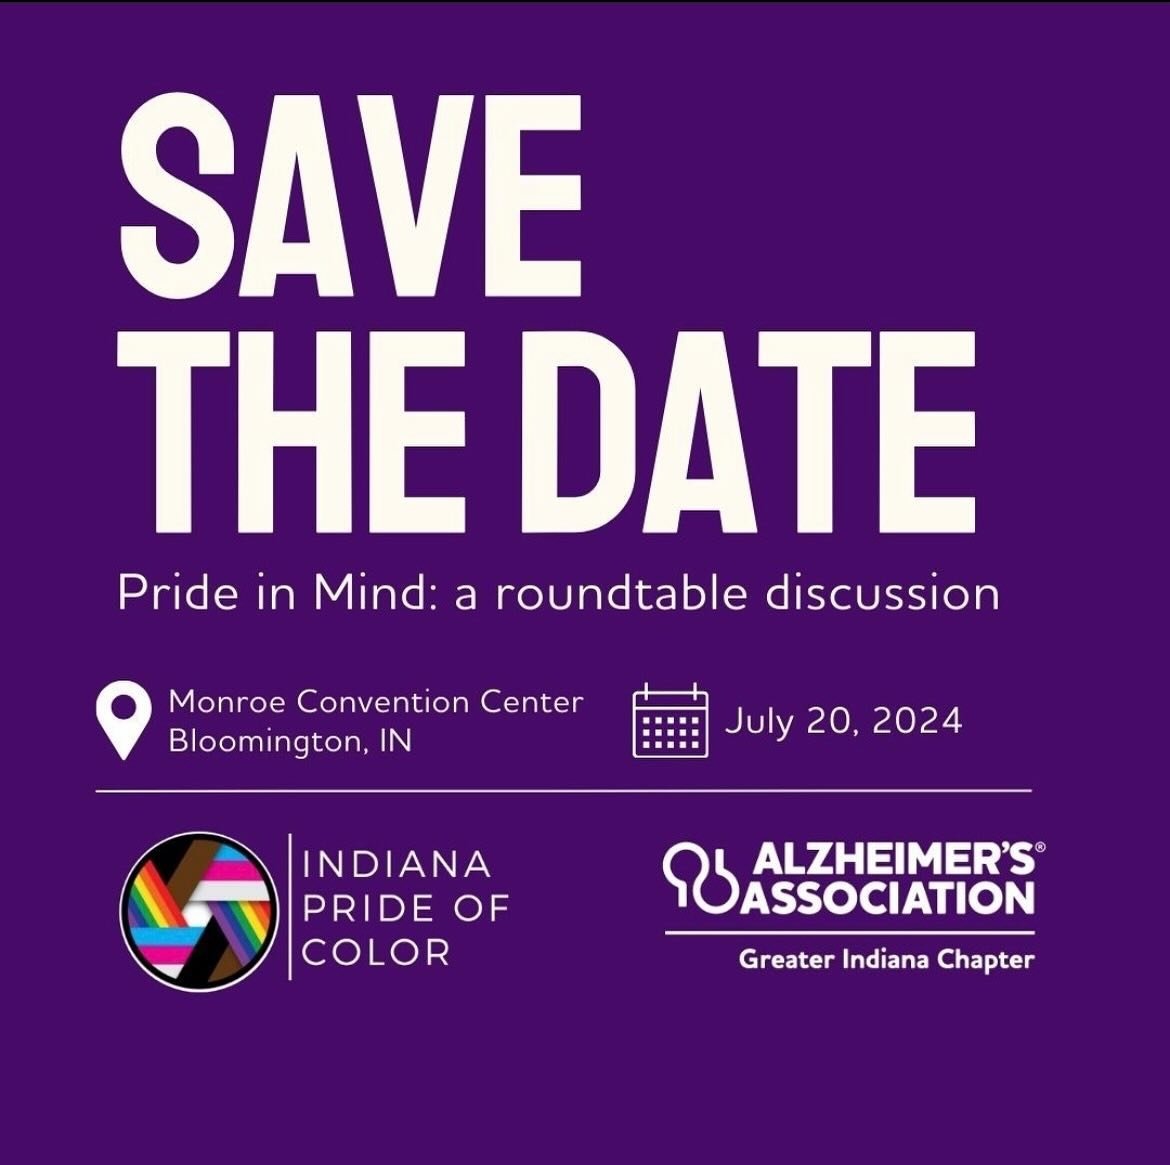 Mark your calendars! 🗓️ we are partnering with @alzindiana to host &ldquo;Pride in Mind: a roundtable discussion&rdquo; July 20th in Bloomington. Stay tuned for more details!